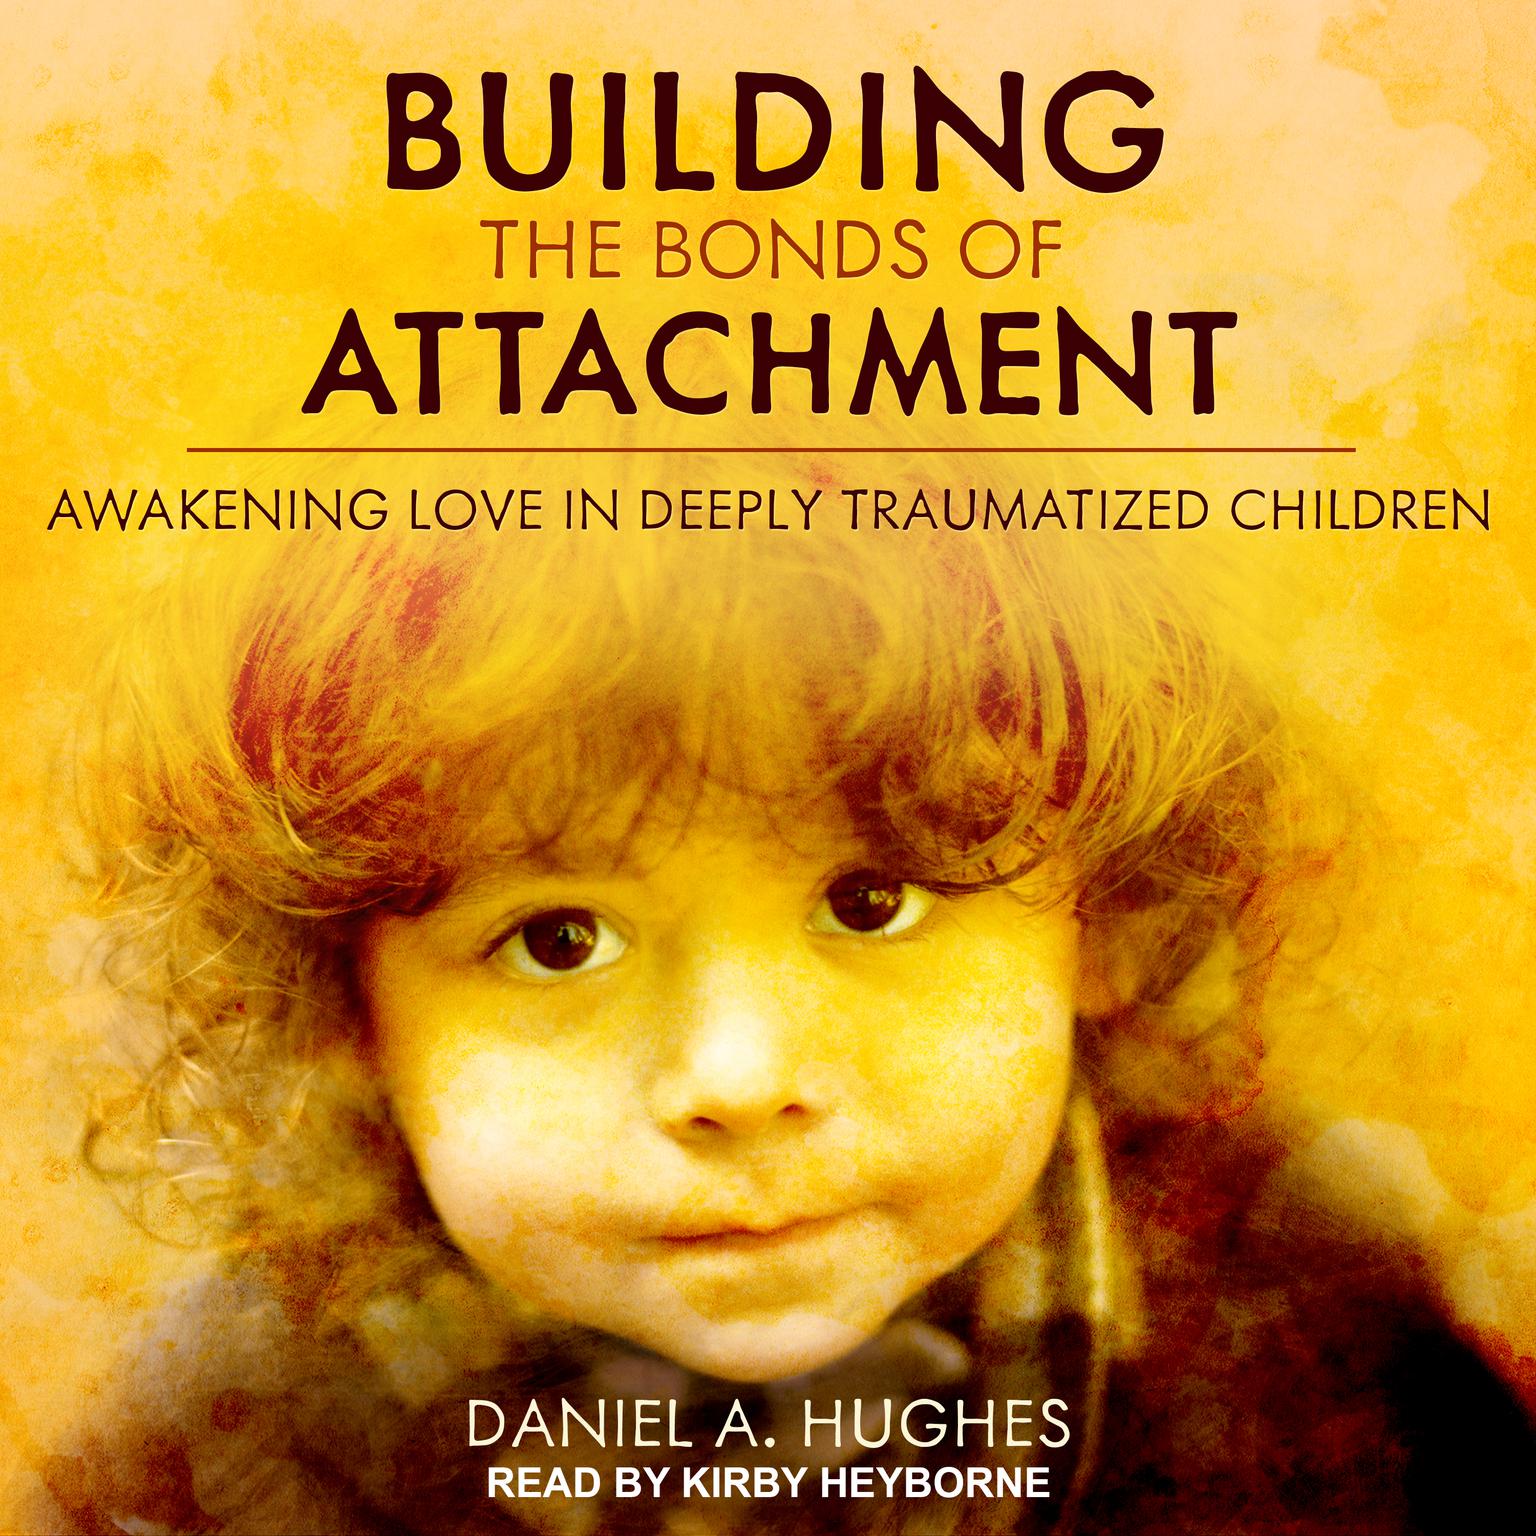 Building the Bonds of Attachment: Awakening Love in Deeply Traumatized Children Audiobook, by Daniel A. Hughes